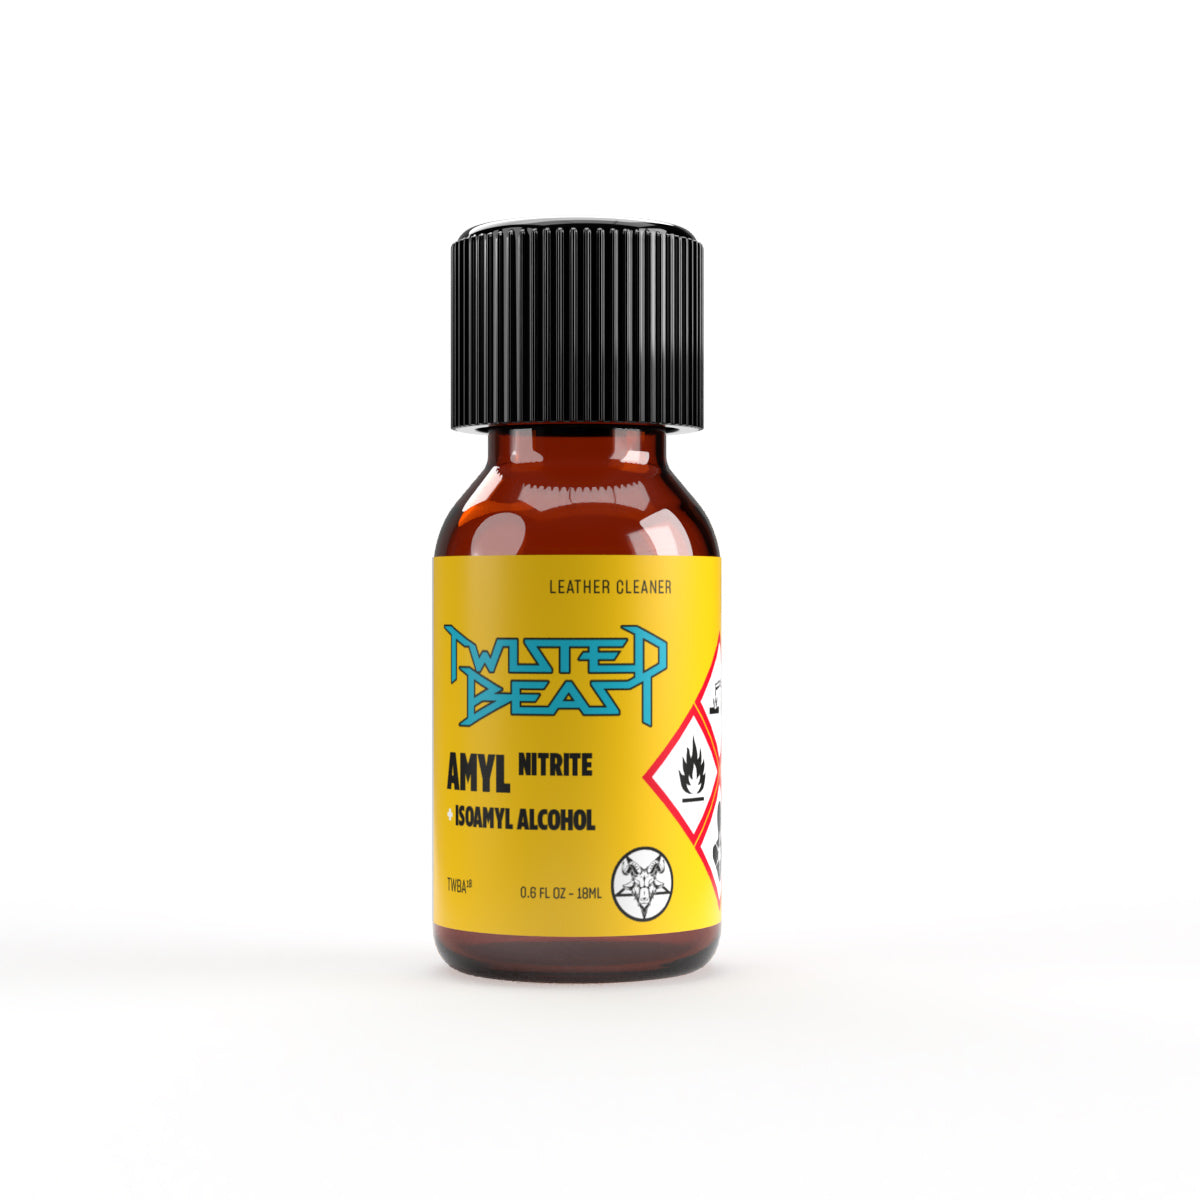 A product photo of Twisted Beast Amyl Poppers.